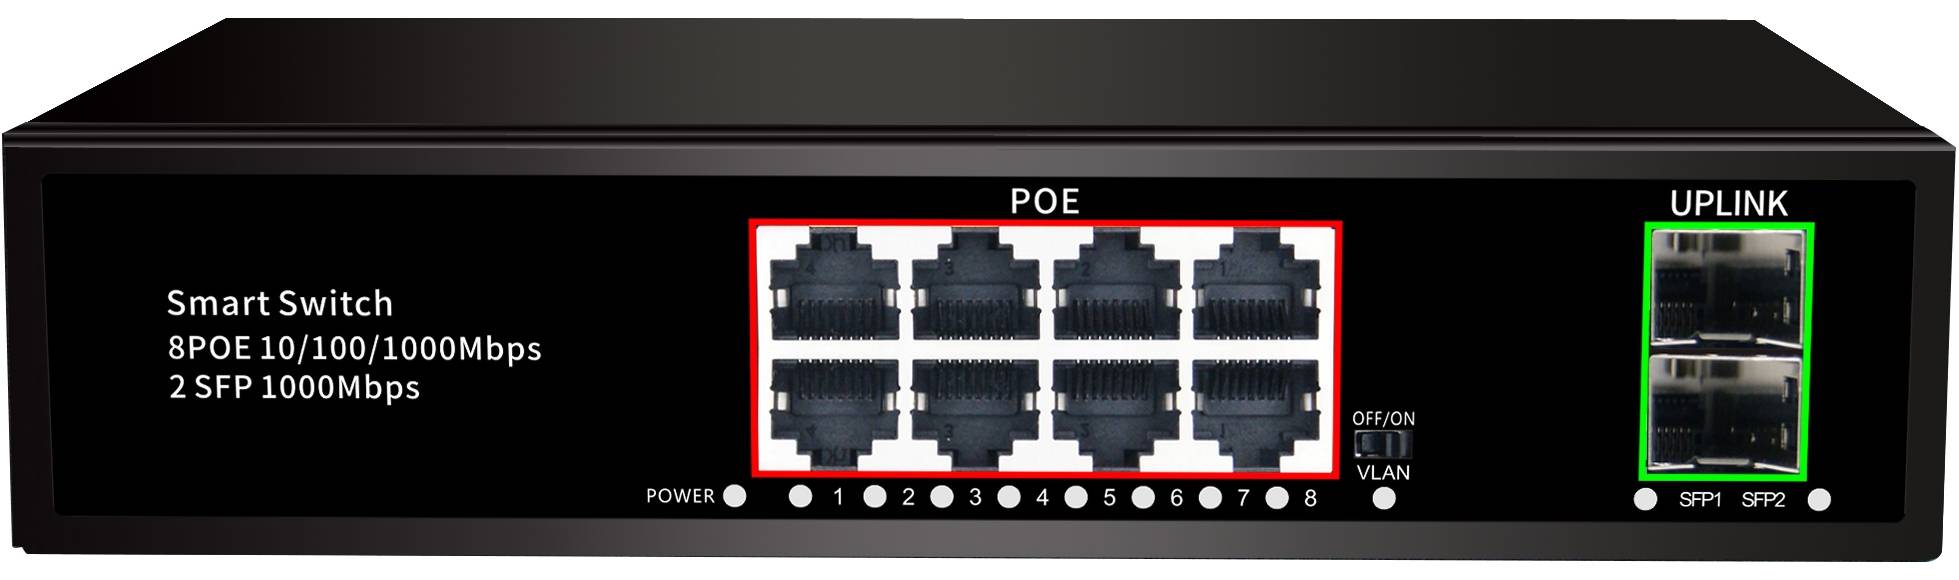 Introduction to the applicable environment of the 8-port PoE Switch